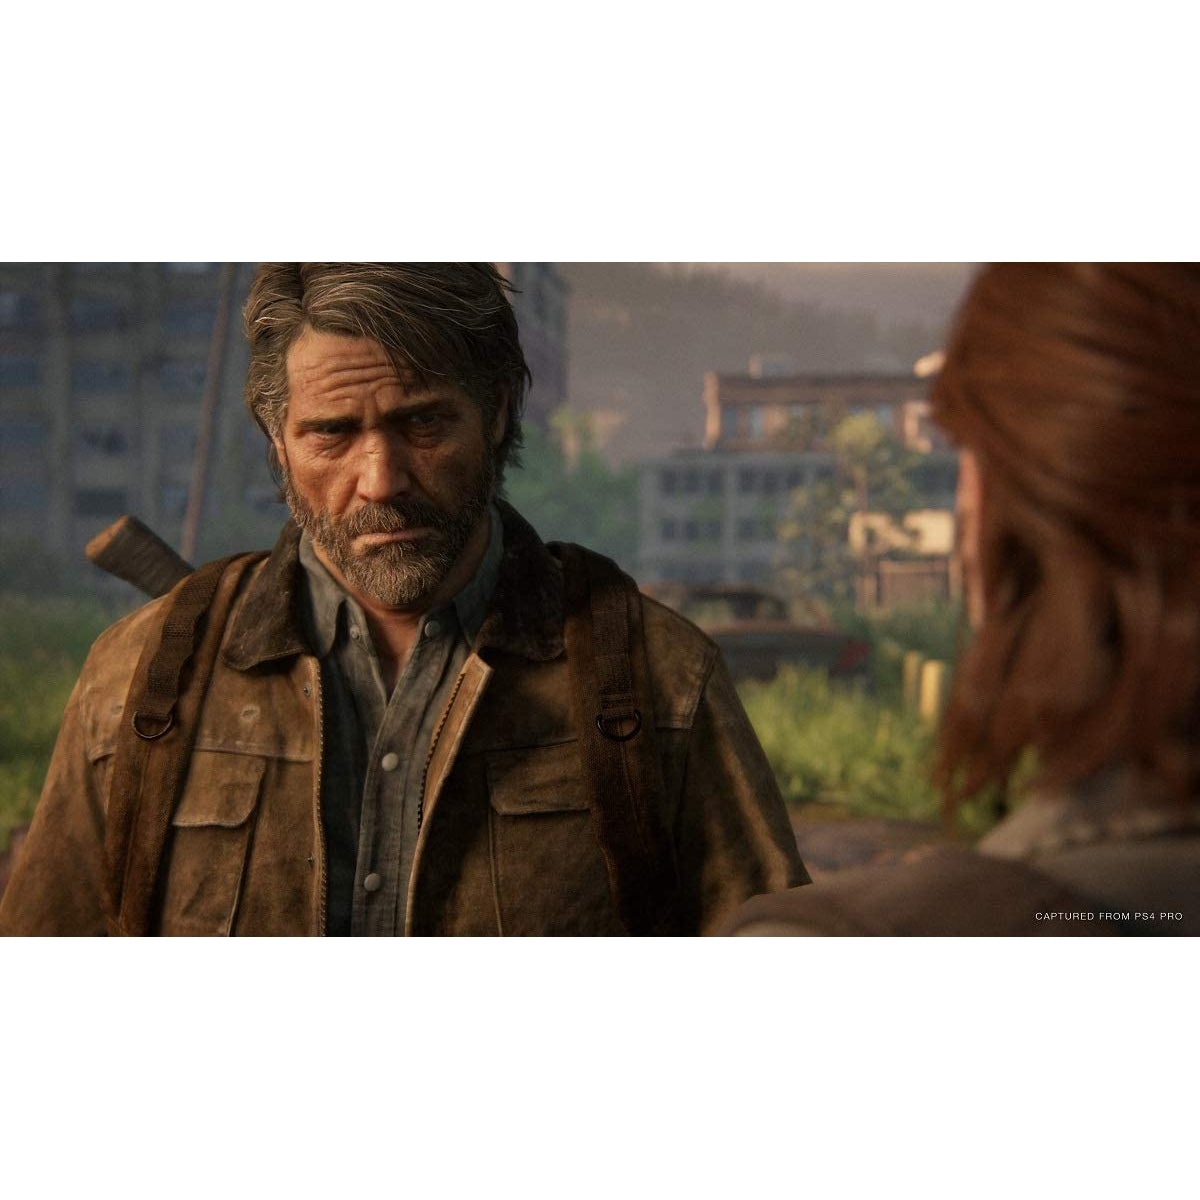 The Last of Us Part II - Special Edition (PS4)